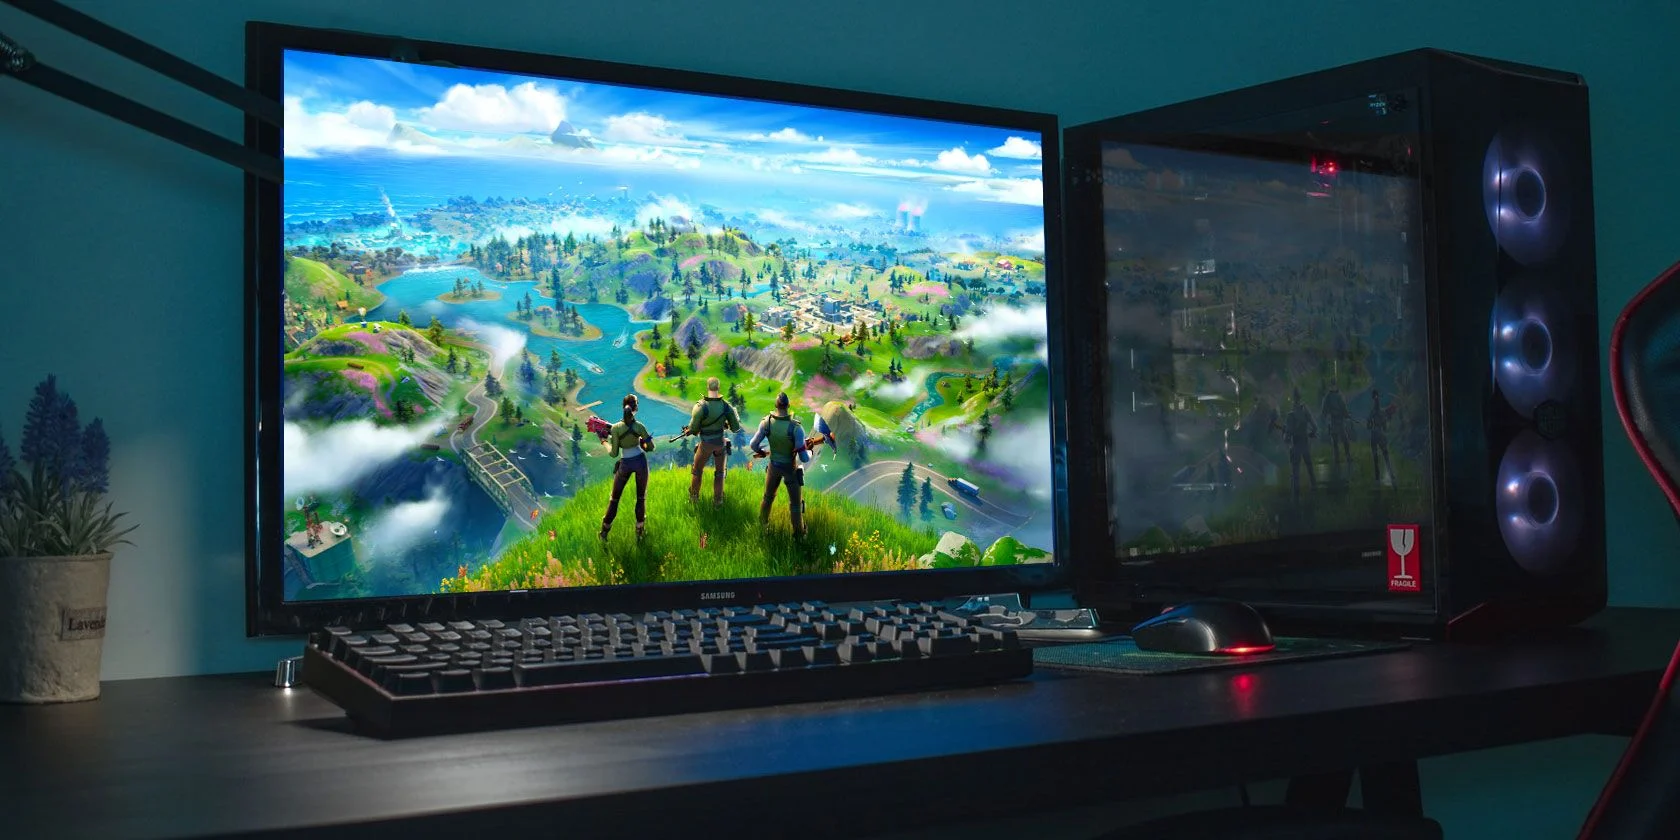 How to Improve FPS and Avoid Lags When Playing Fortnite